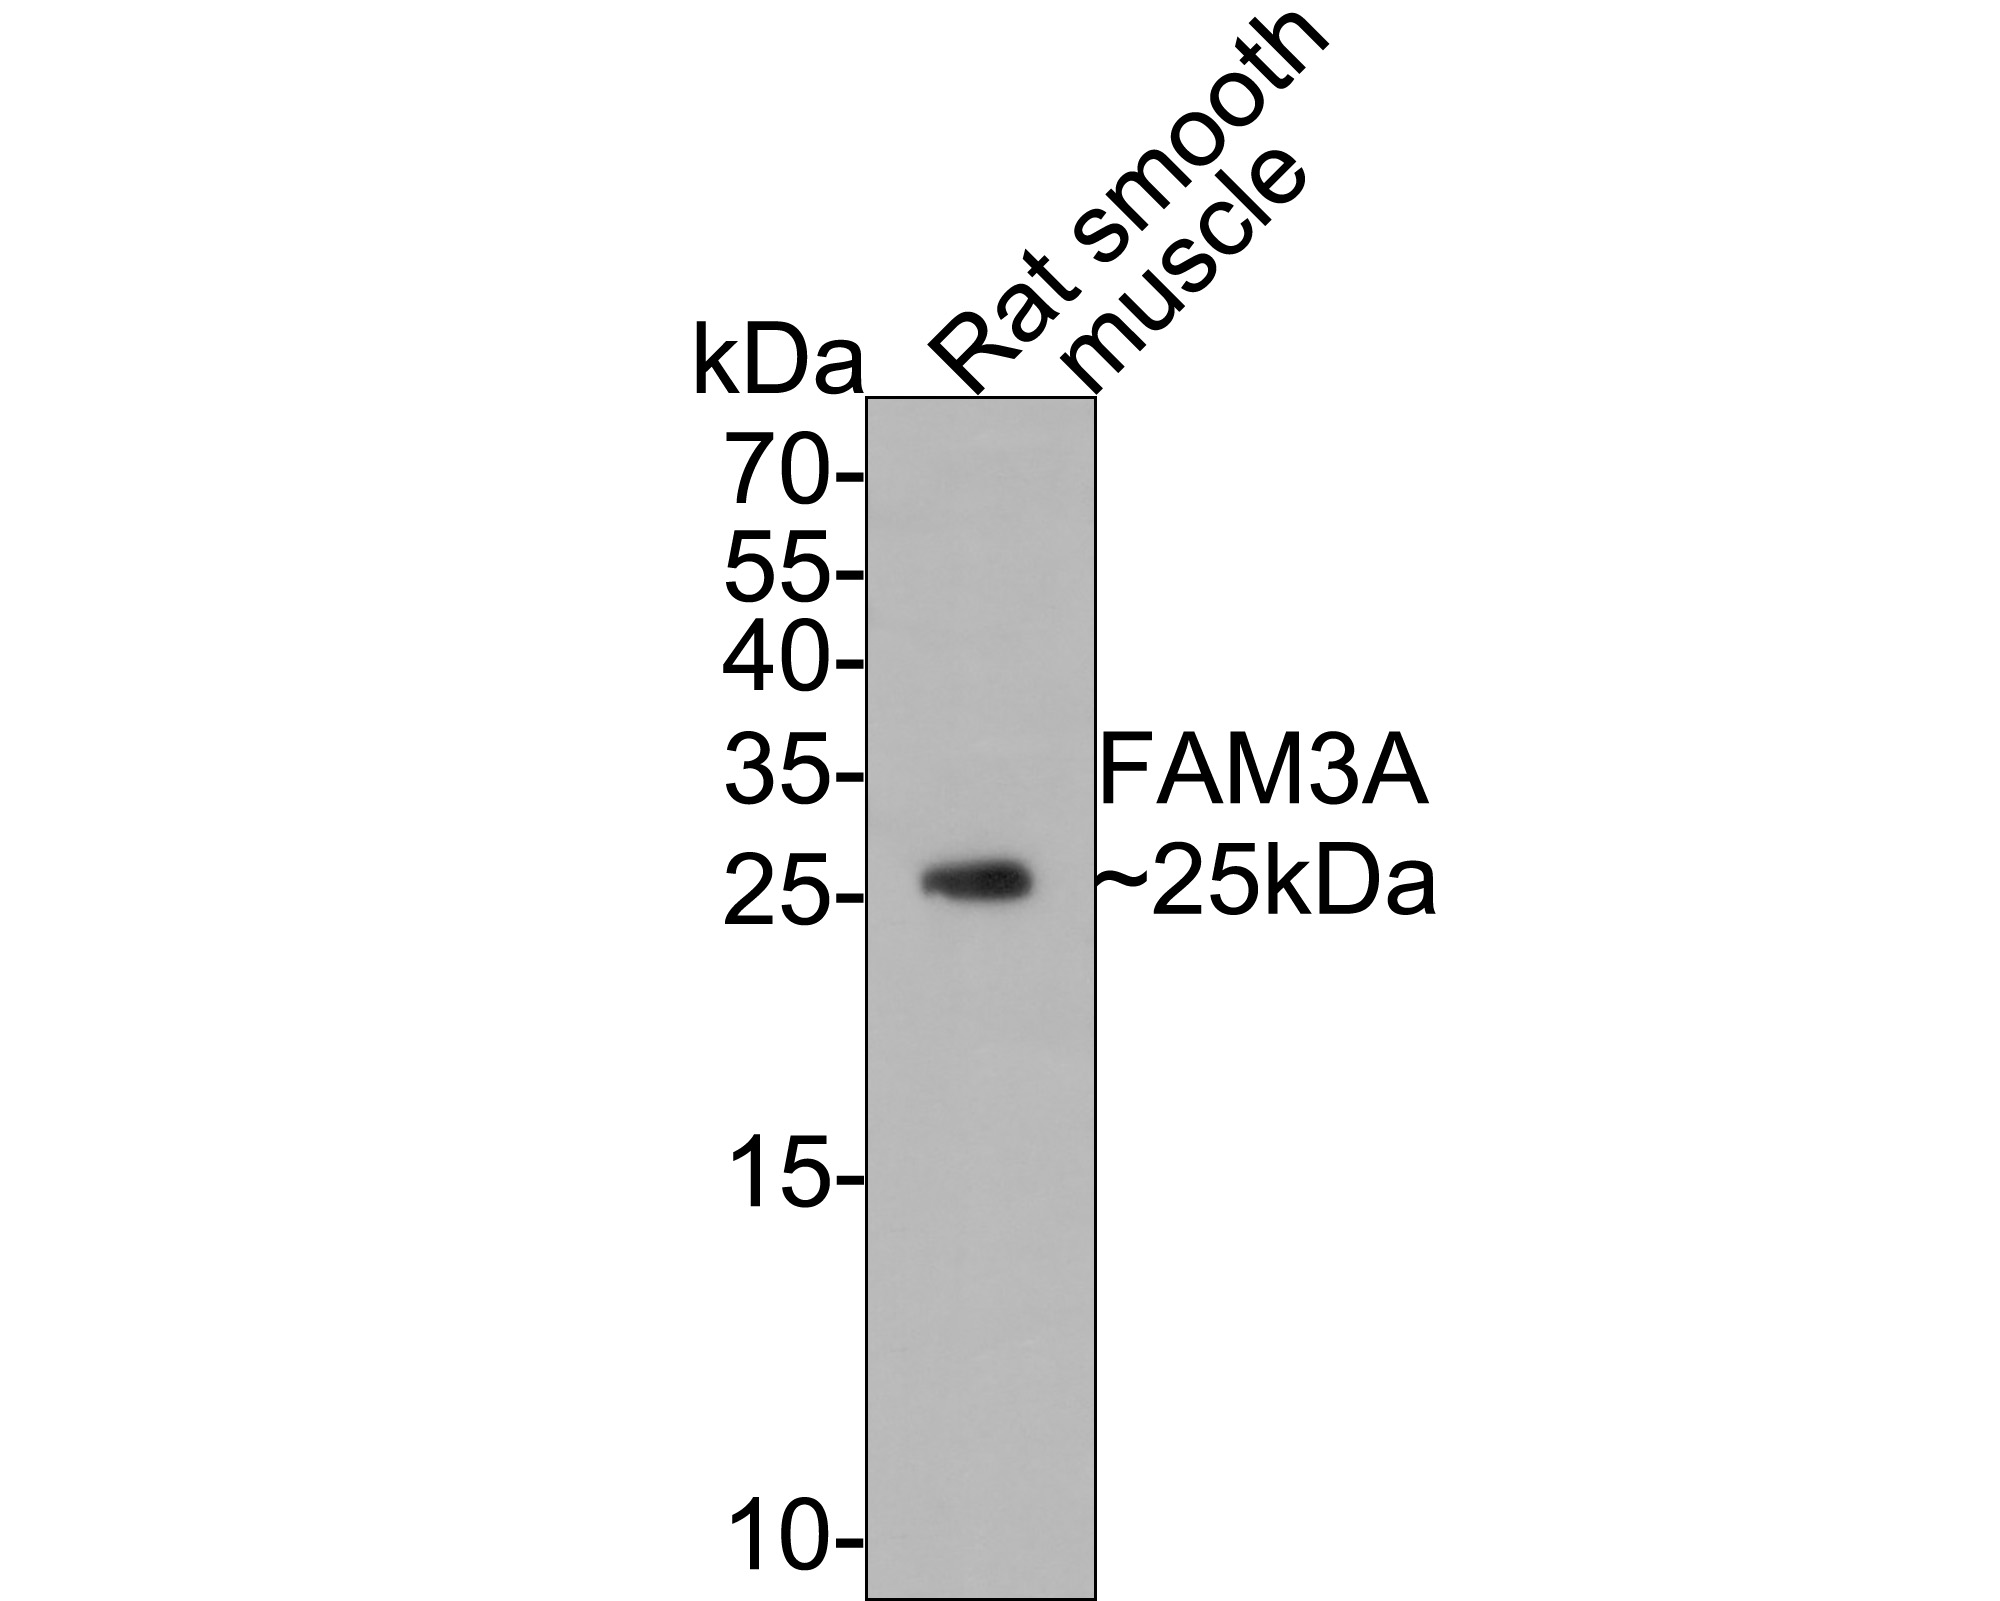 Western blot analysis of FAM3A on rat smooth muscle tissue lysates with Mouse anti-FAM3A antibody (M1008-10) at 1/500 dilution.<br />
<br />
Lysates/proteins at 20 µg/Lane.<br />
<br />
Predicted band size: 25 kDa<br />
Observed band size: 25 kDa<br />
<br />
Exposure time: 30 seconds;<br />
<br />
15% SDS-PAGE gel.<br />
<br />
Proteins were transferred to a PVDF membrane and blocked with 5% NFDM/TBST for 1 hour at room temperature. The primary antibody (M1008-10) at 1/500 dilution was used in 5% NFDM/TBST at room temperature for 2 hours. Goat Anti-Mouse IgG - HRP Secondary Antibody (HA1006) at 1:100,000 dilution was used for 1 hour at room temperature.